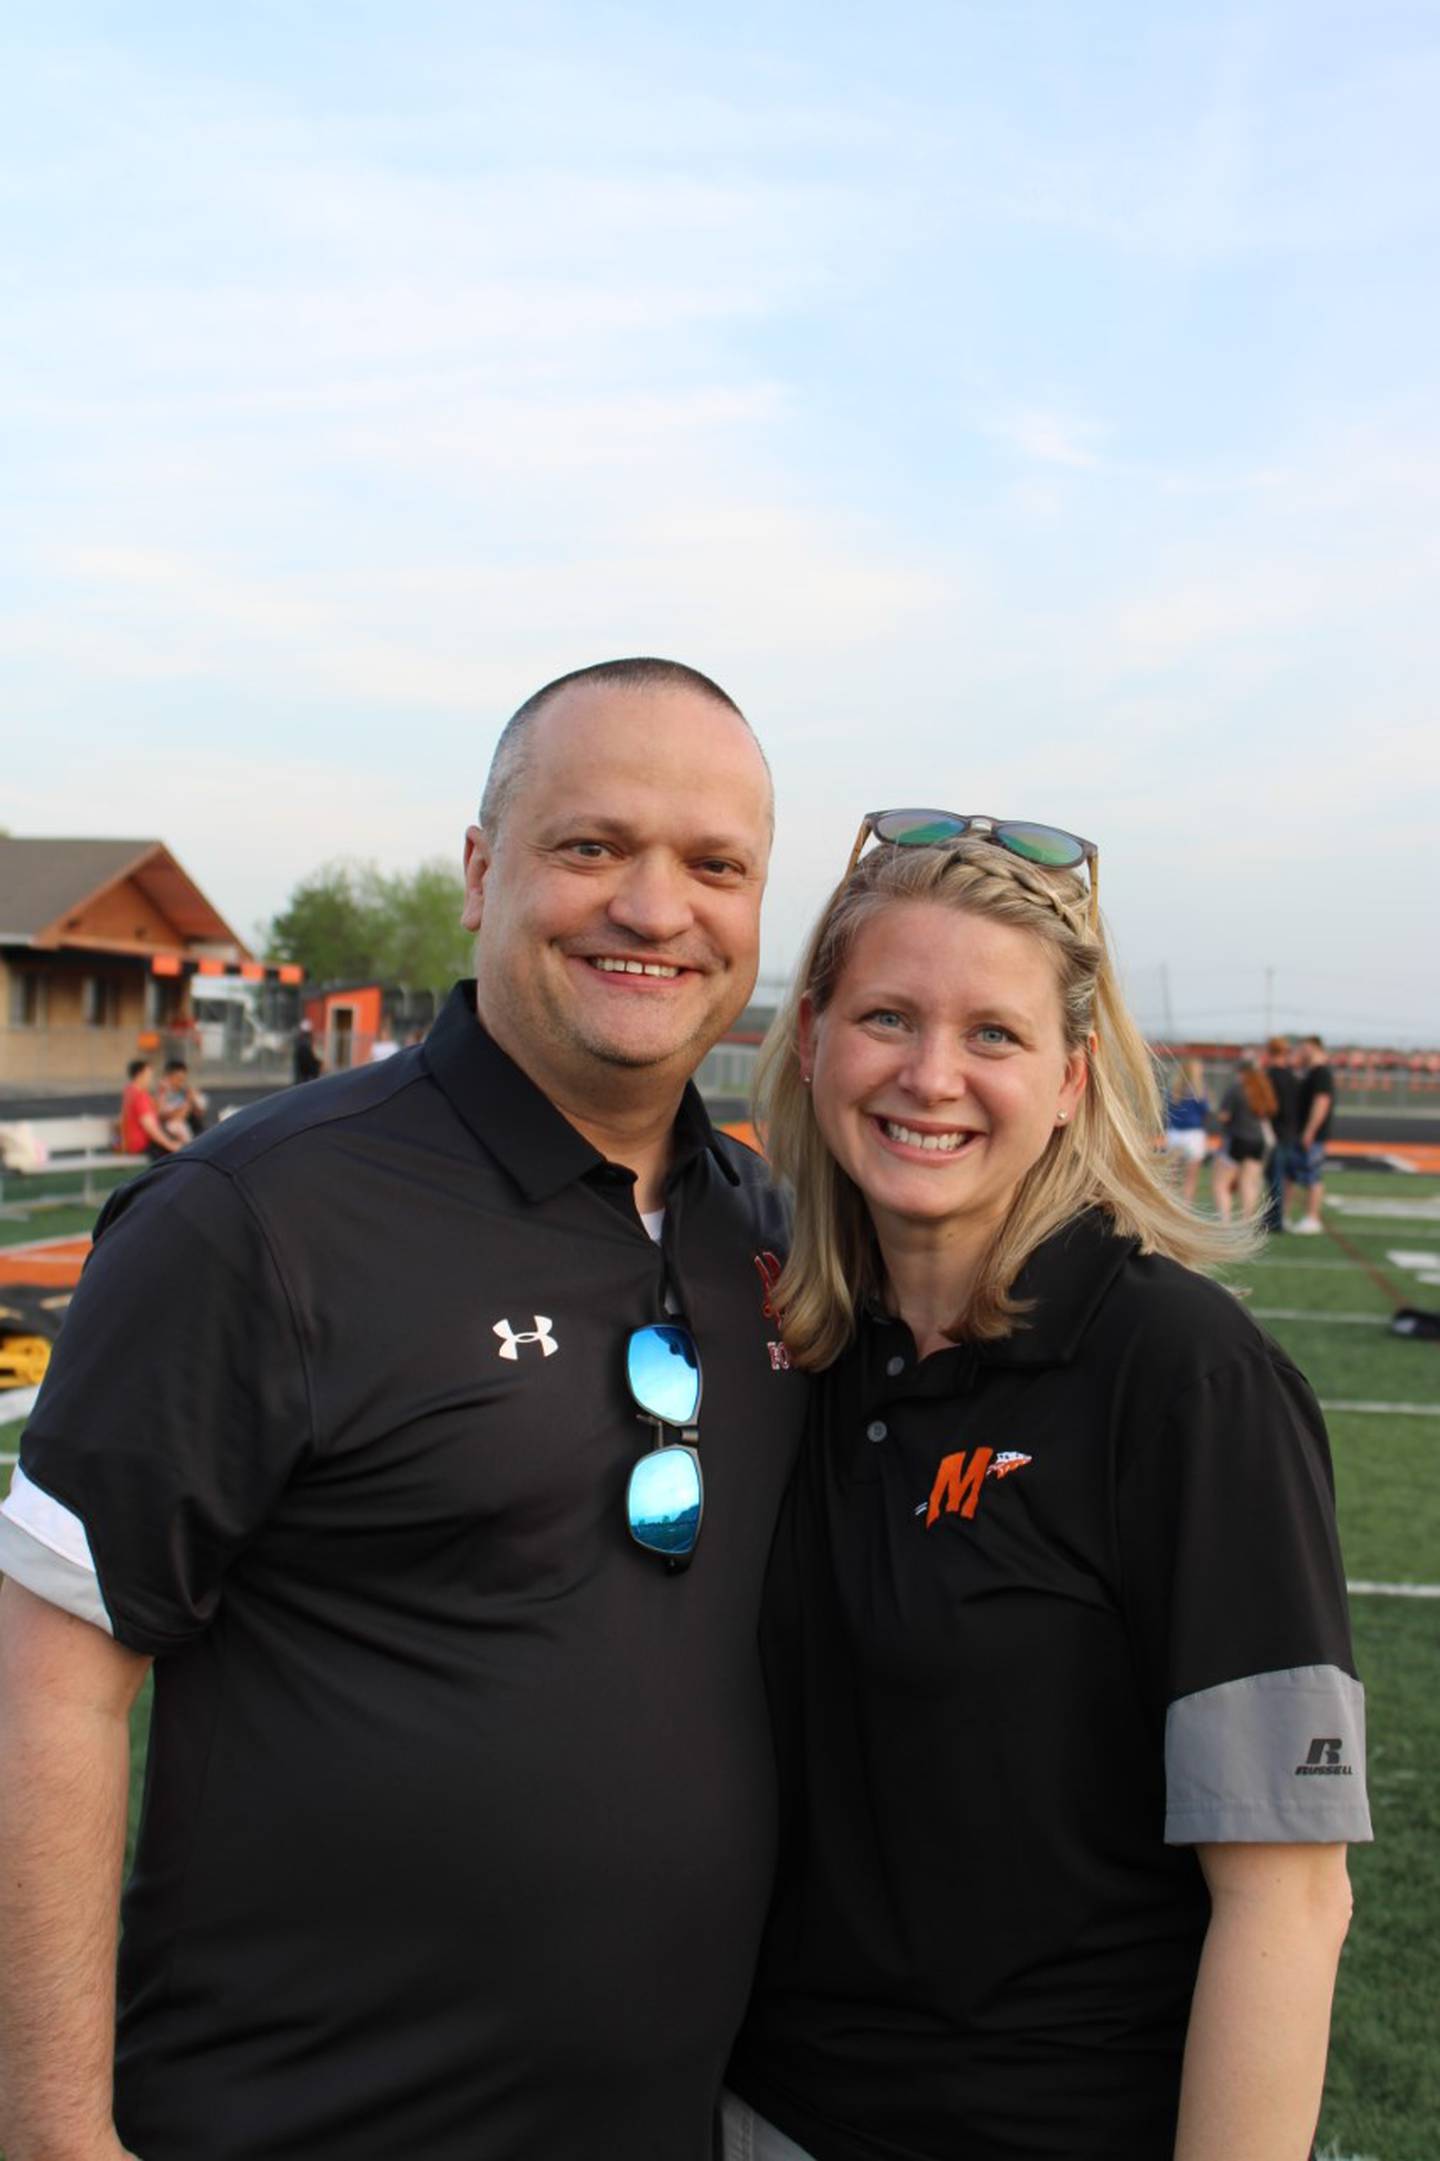 Michelle Erickson and her husband Chris  at last year's "Senior Sunset" event.